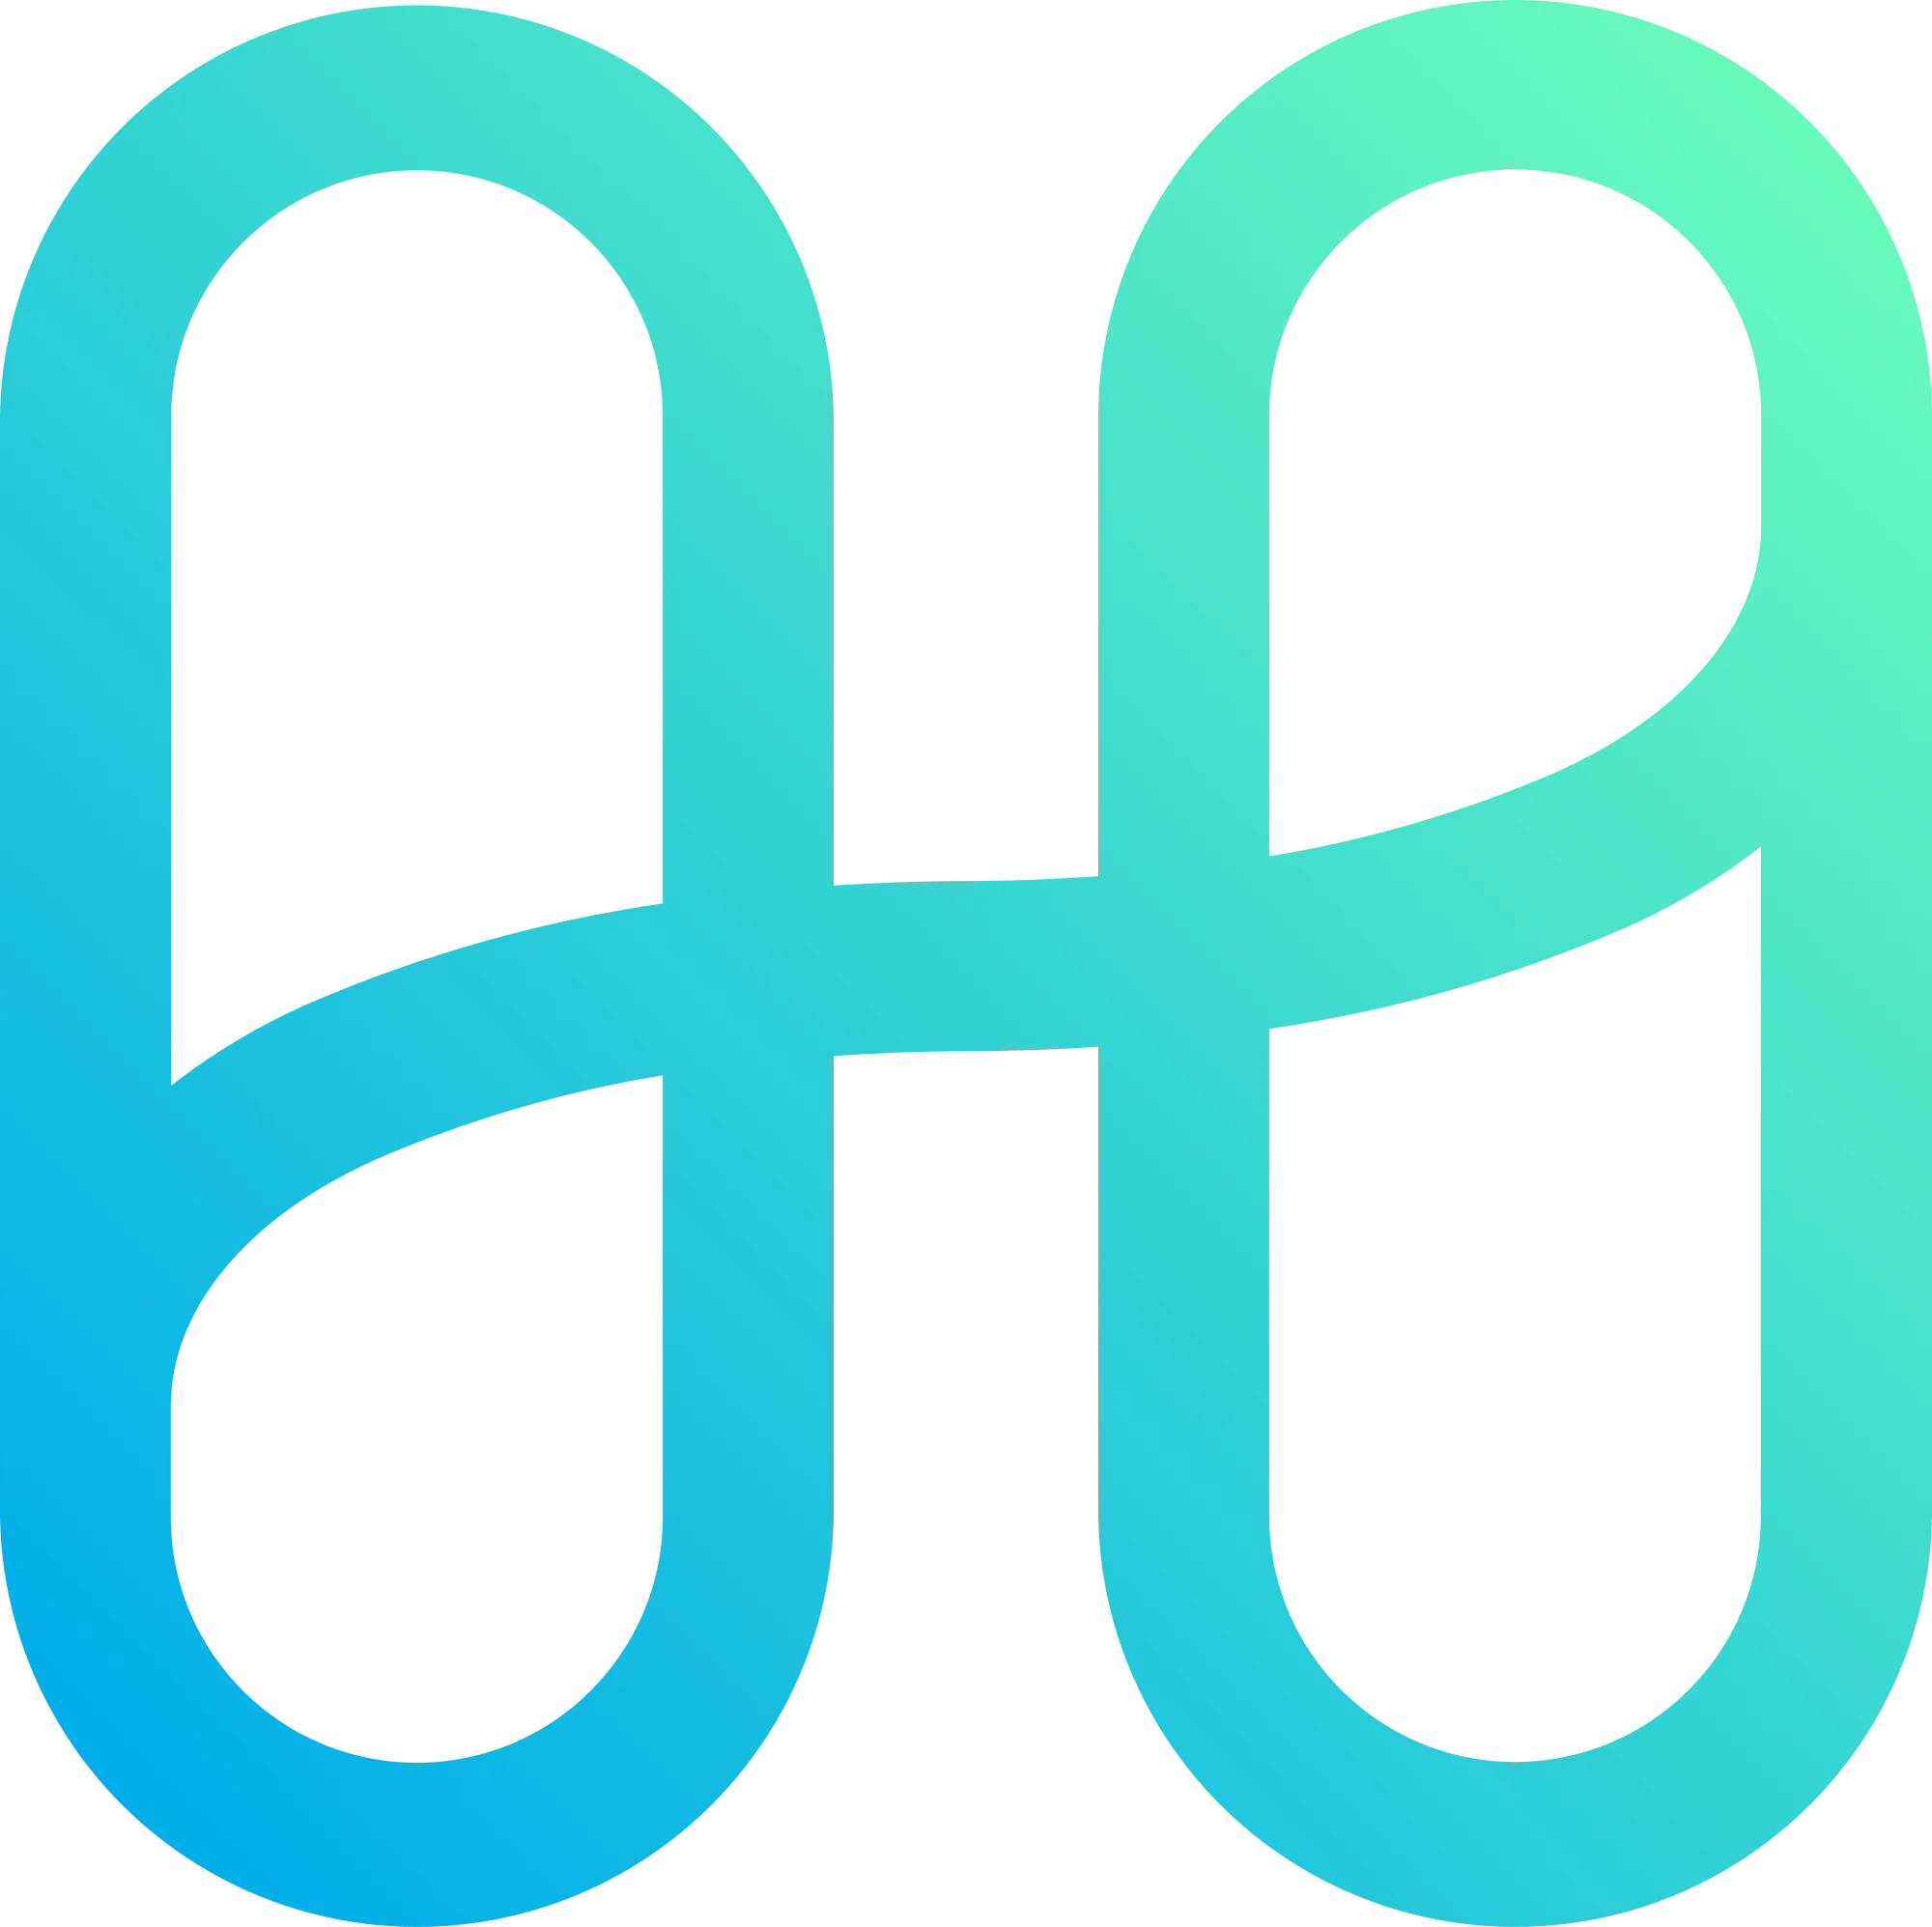 Harmony logo in png format